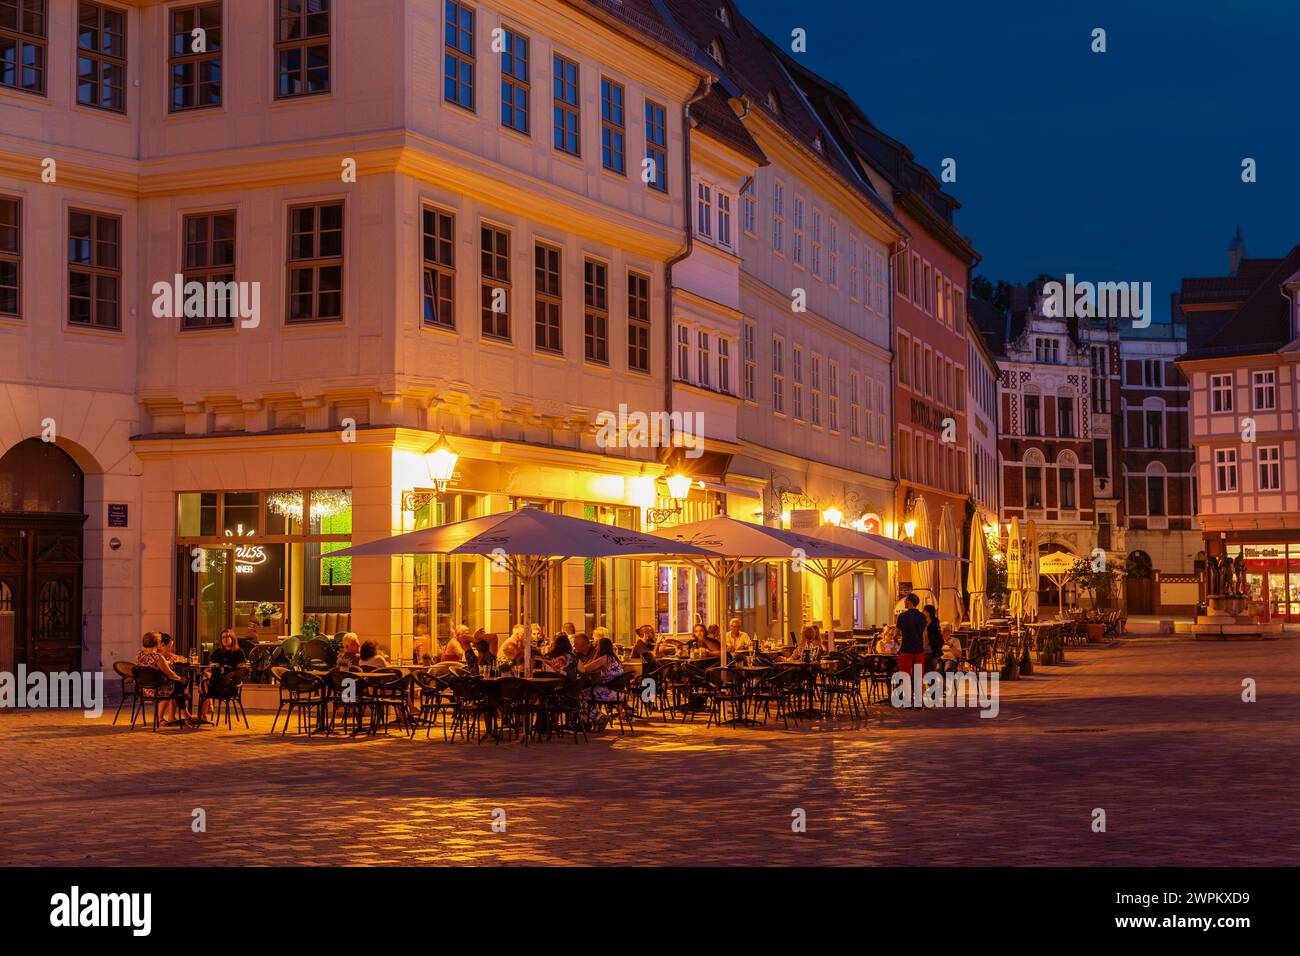 Cafe on the Market Place in the evening, Quedlinburg, Harz, Saxony-Anhalt, Germany, Europe Stock Photo